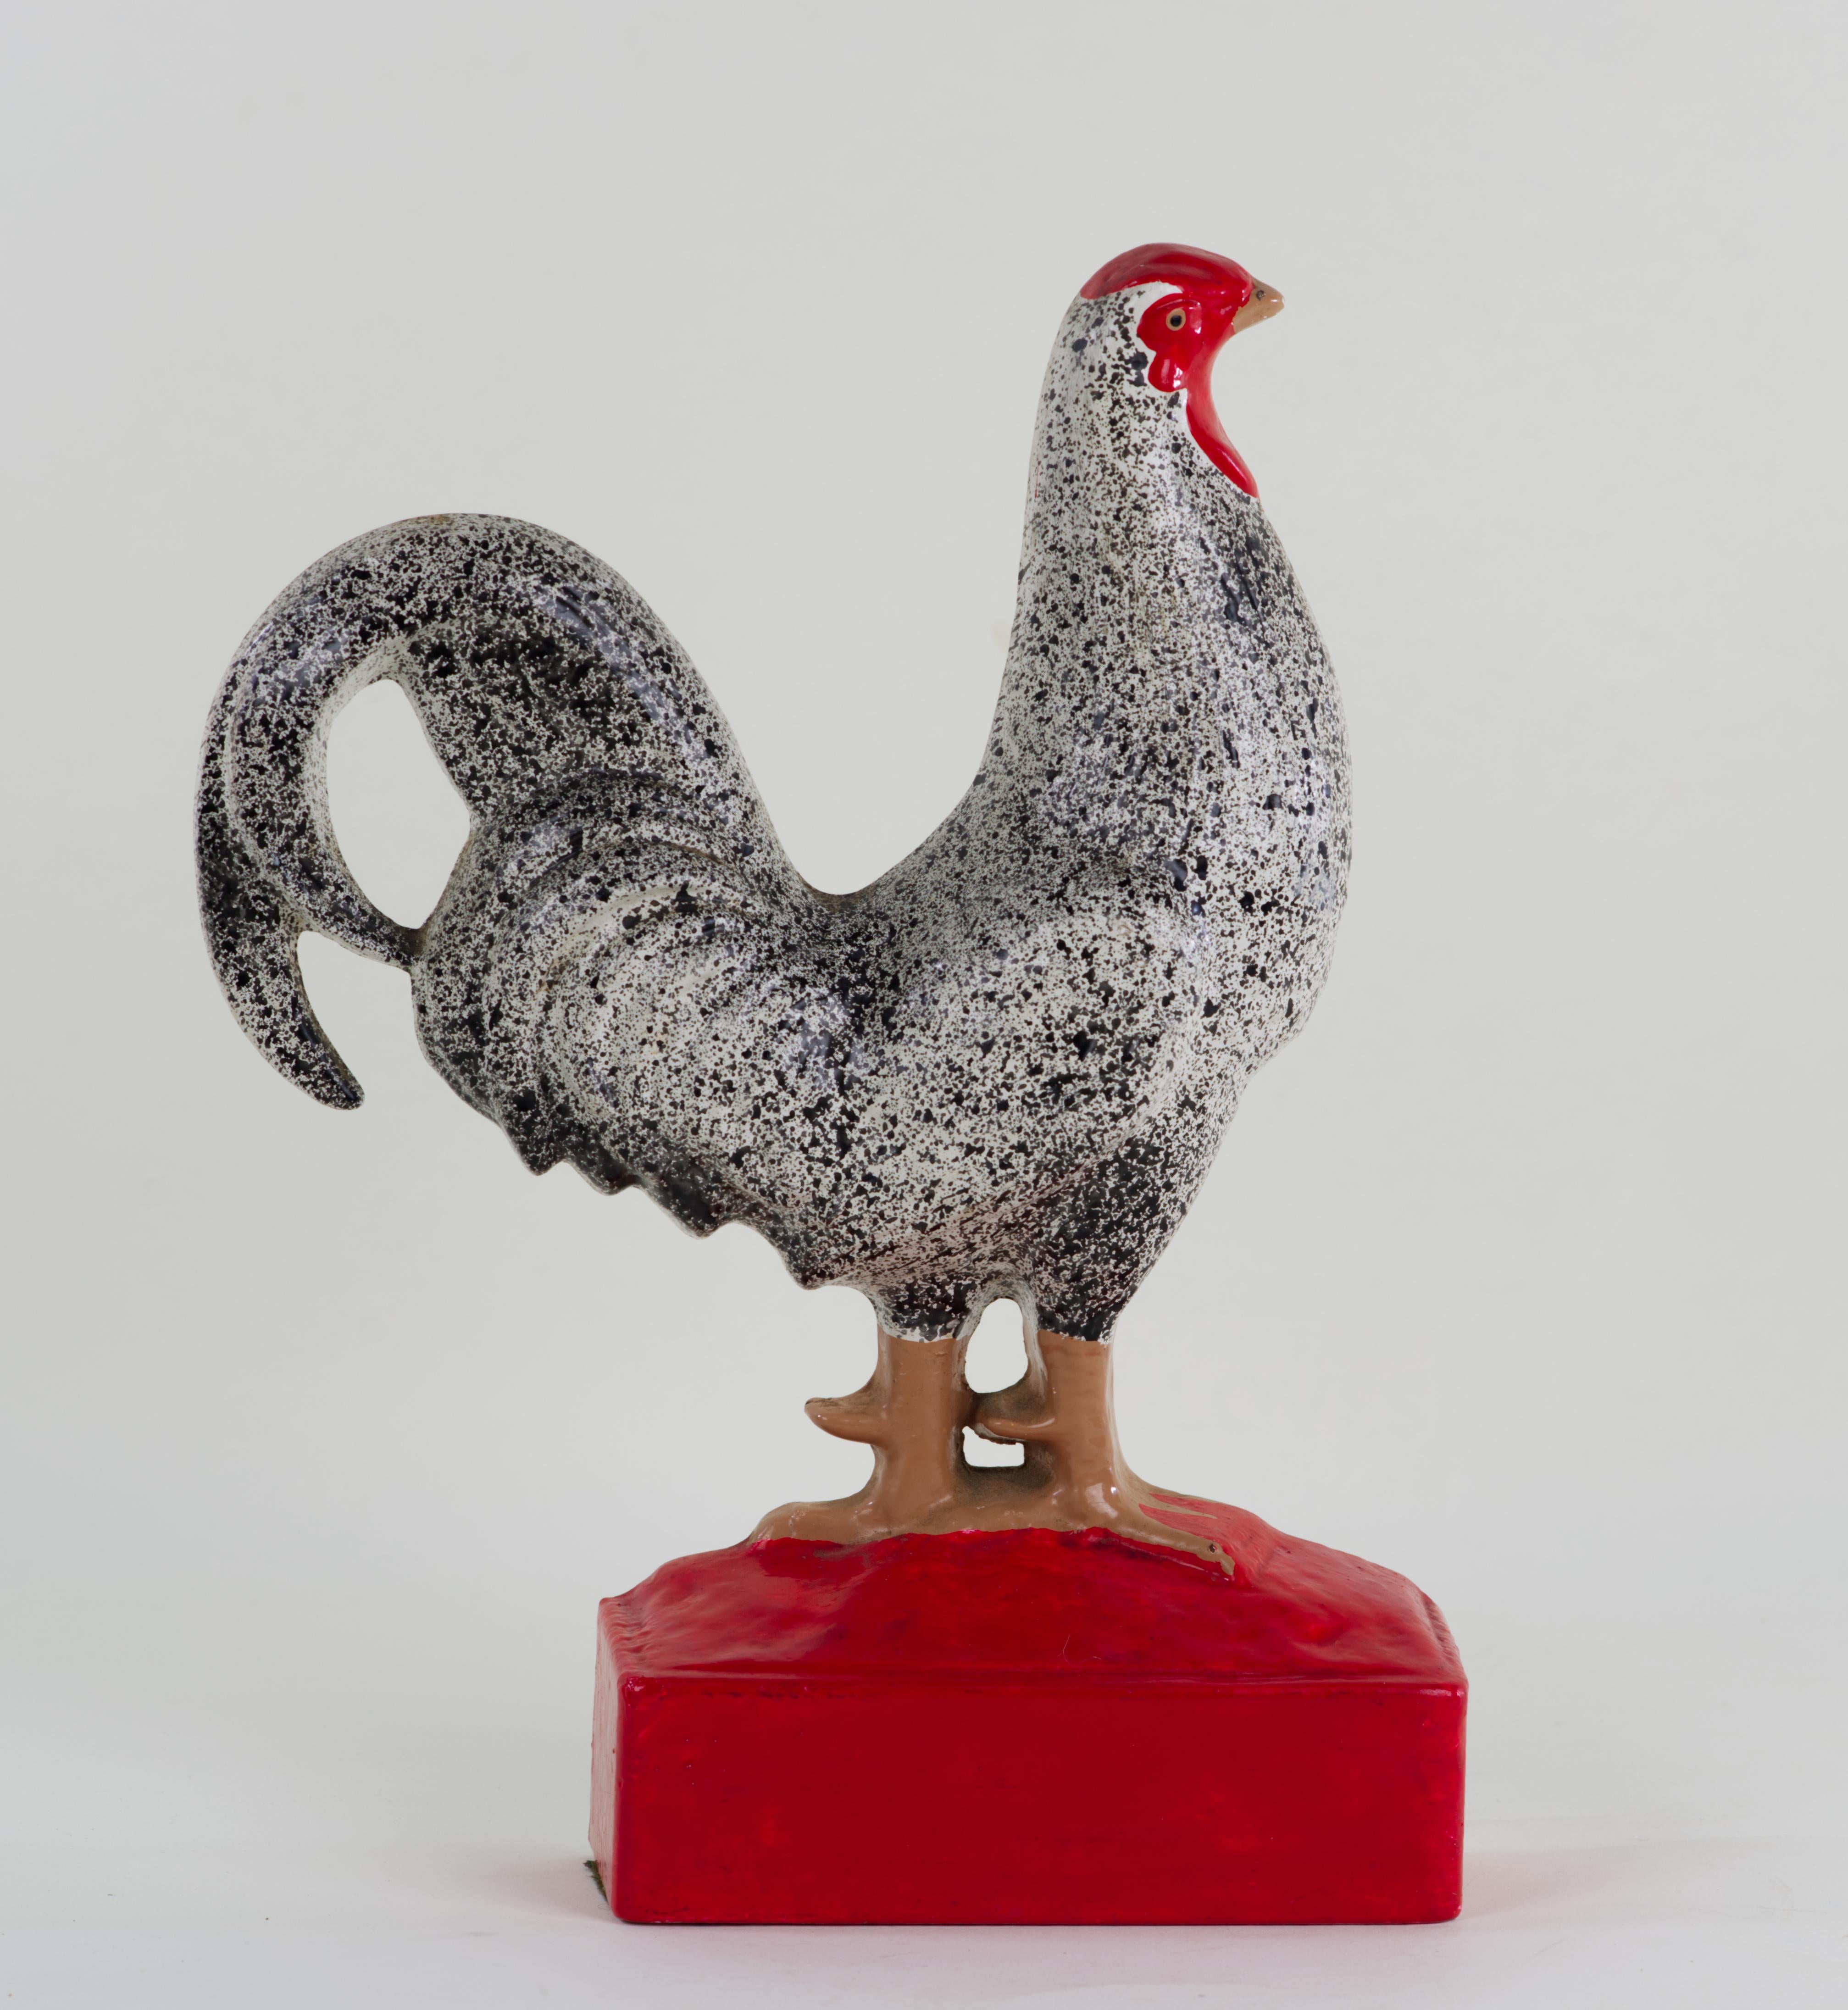  Cast iron enameled chicken figurine can be used as a doorstop or as a decor piece. The piece is highly detailed with individual tail and wings feathers and head structure molded separately. The body of the chicken is painted with black and grey